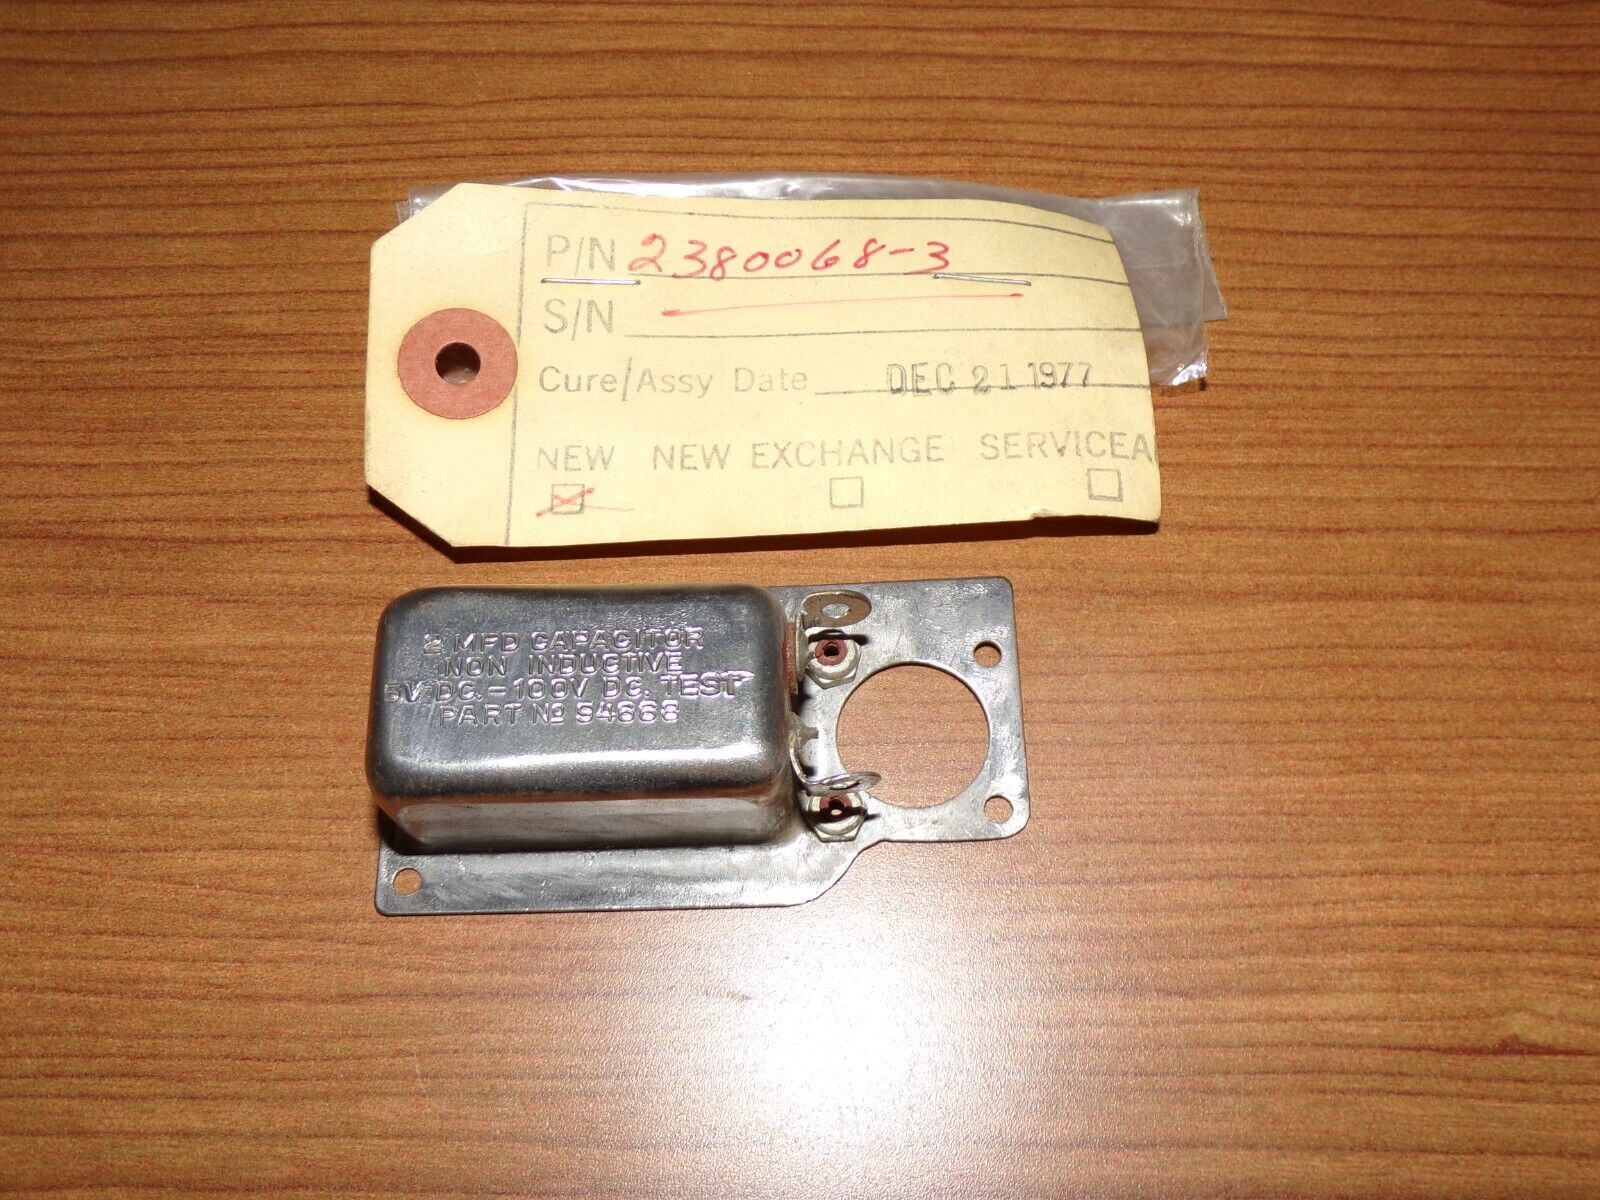 Bombardier Learjet Non-Inductive Capacitor 2380068-3 (5V DC - 100V DC Test)